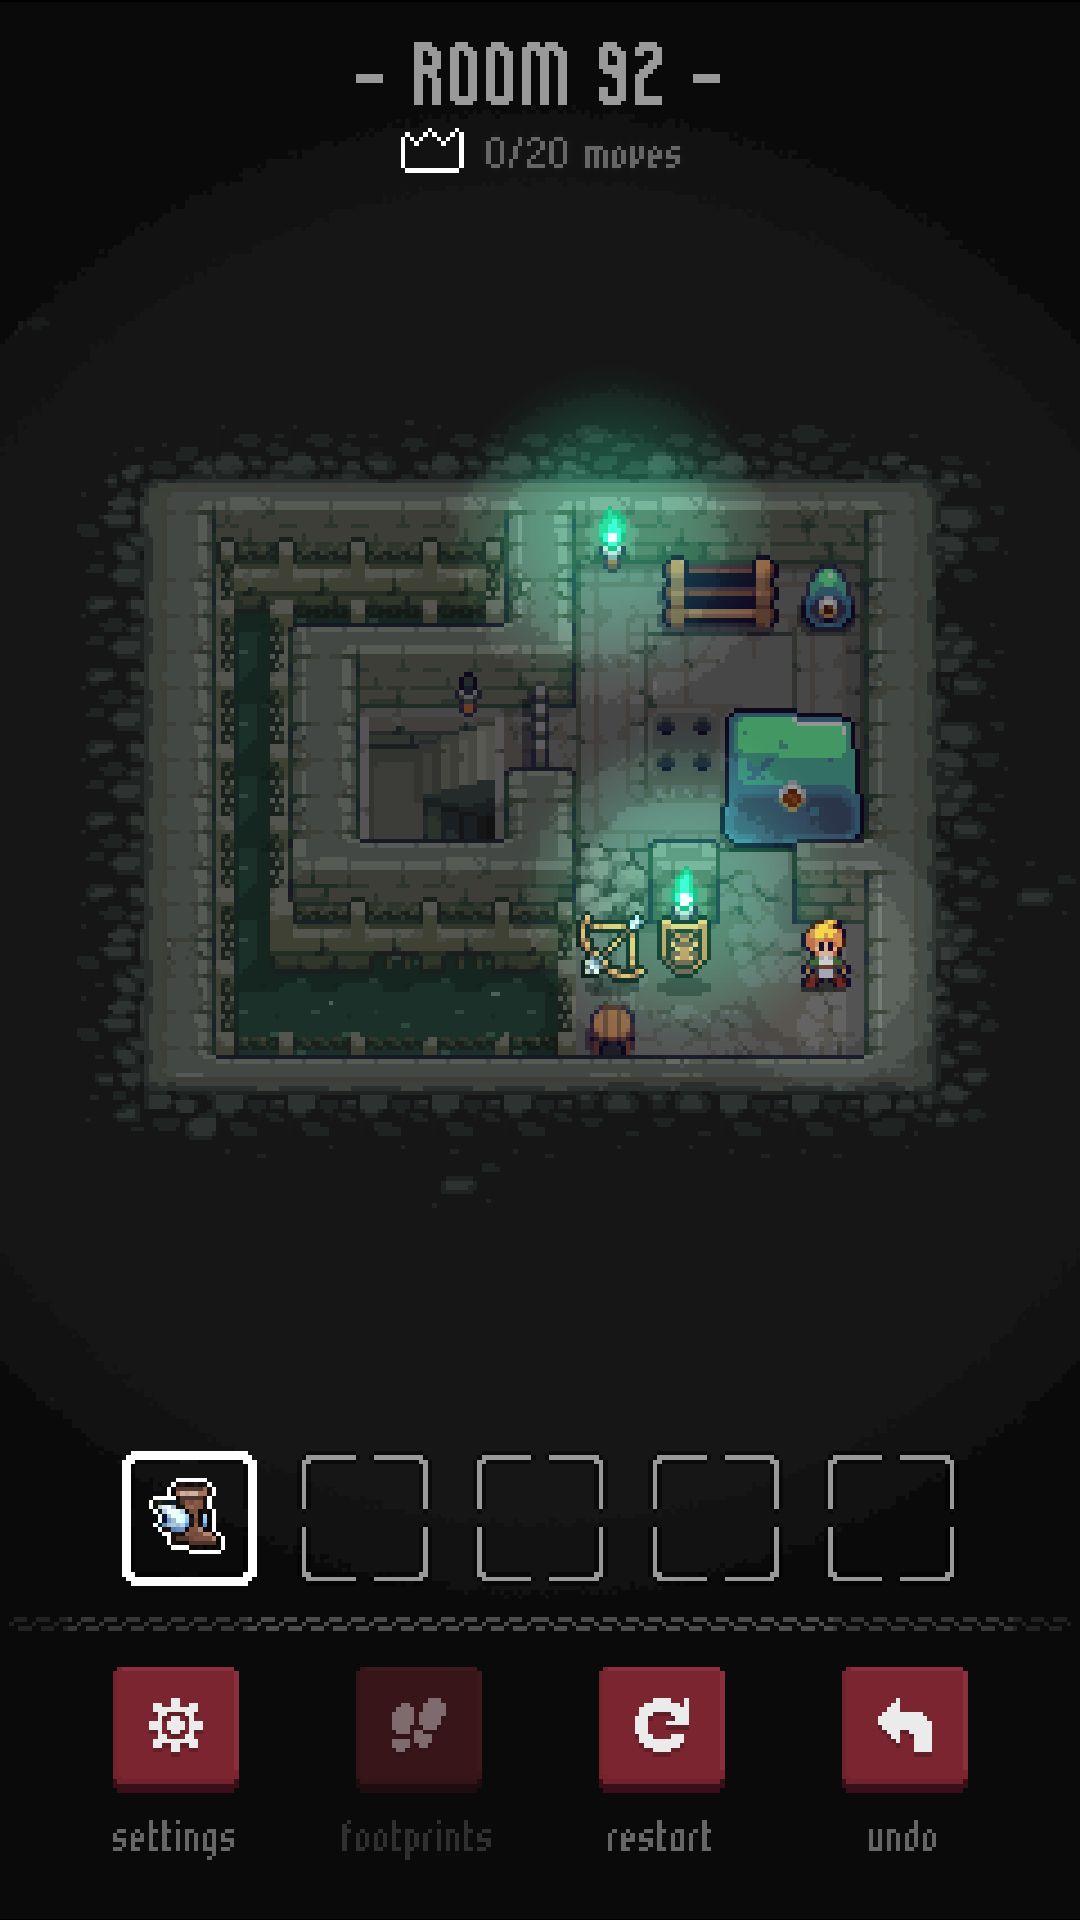 Dungeon and Puzzles - Sokoban - Android game screenshots.